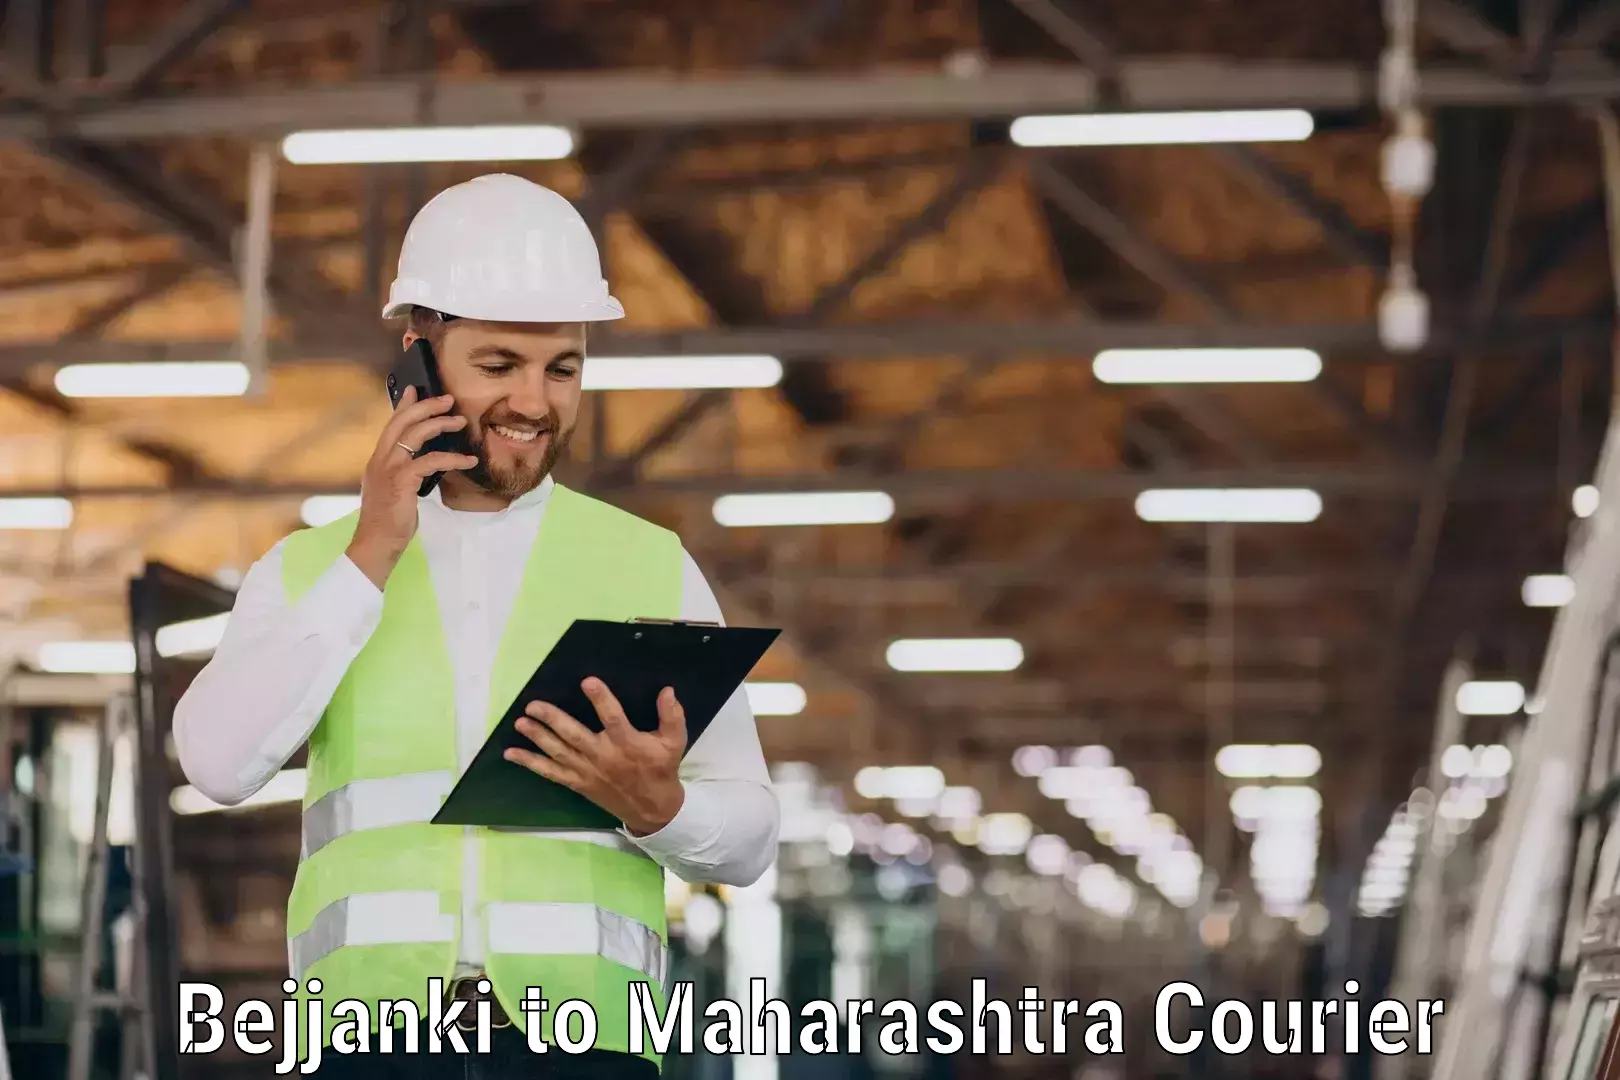 Easy access courier services Bejjanki to Lanja